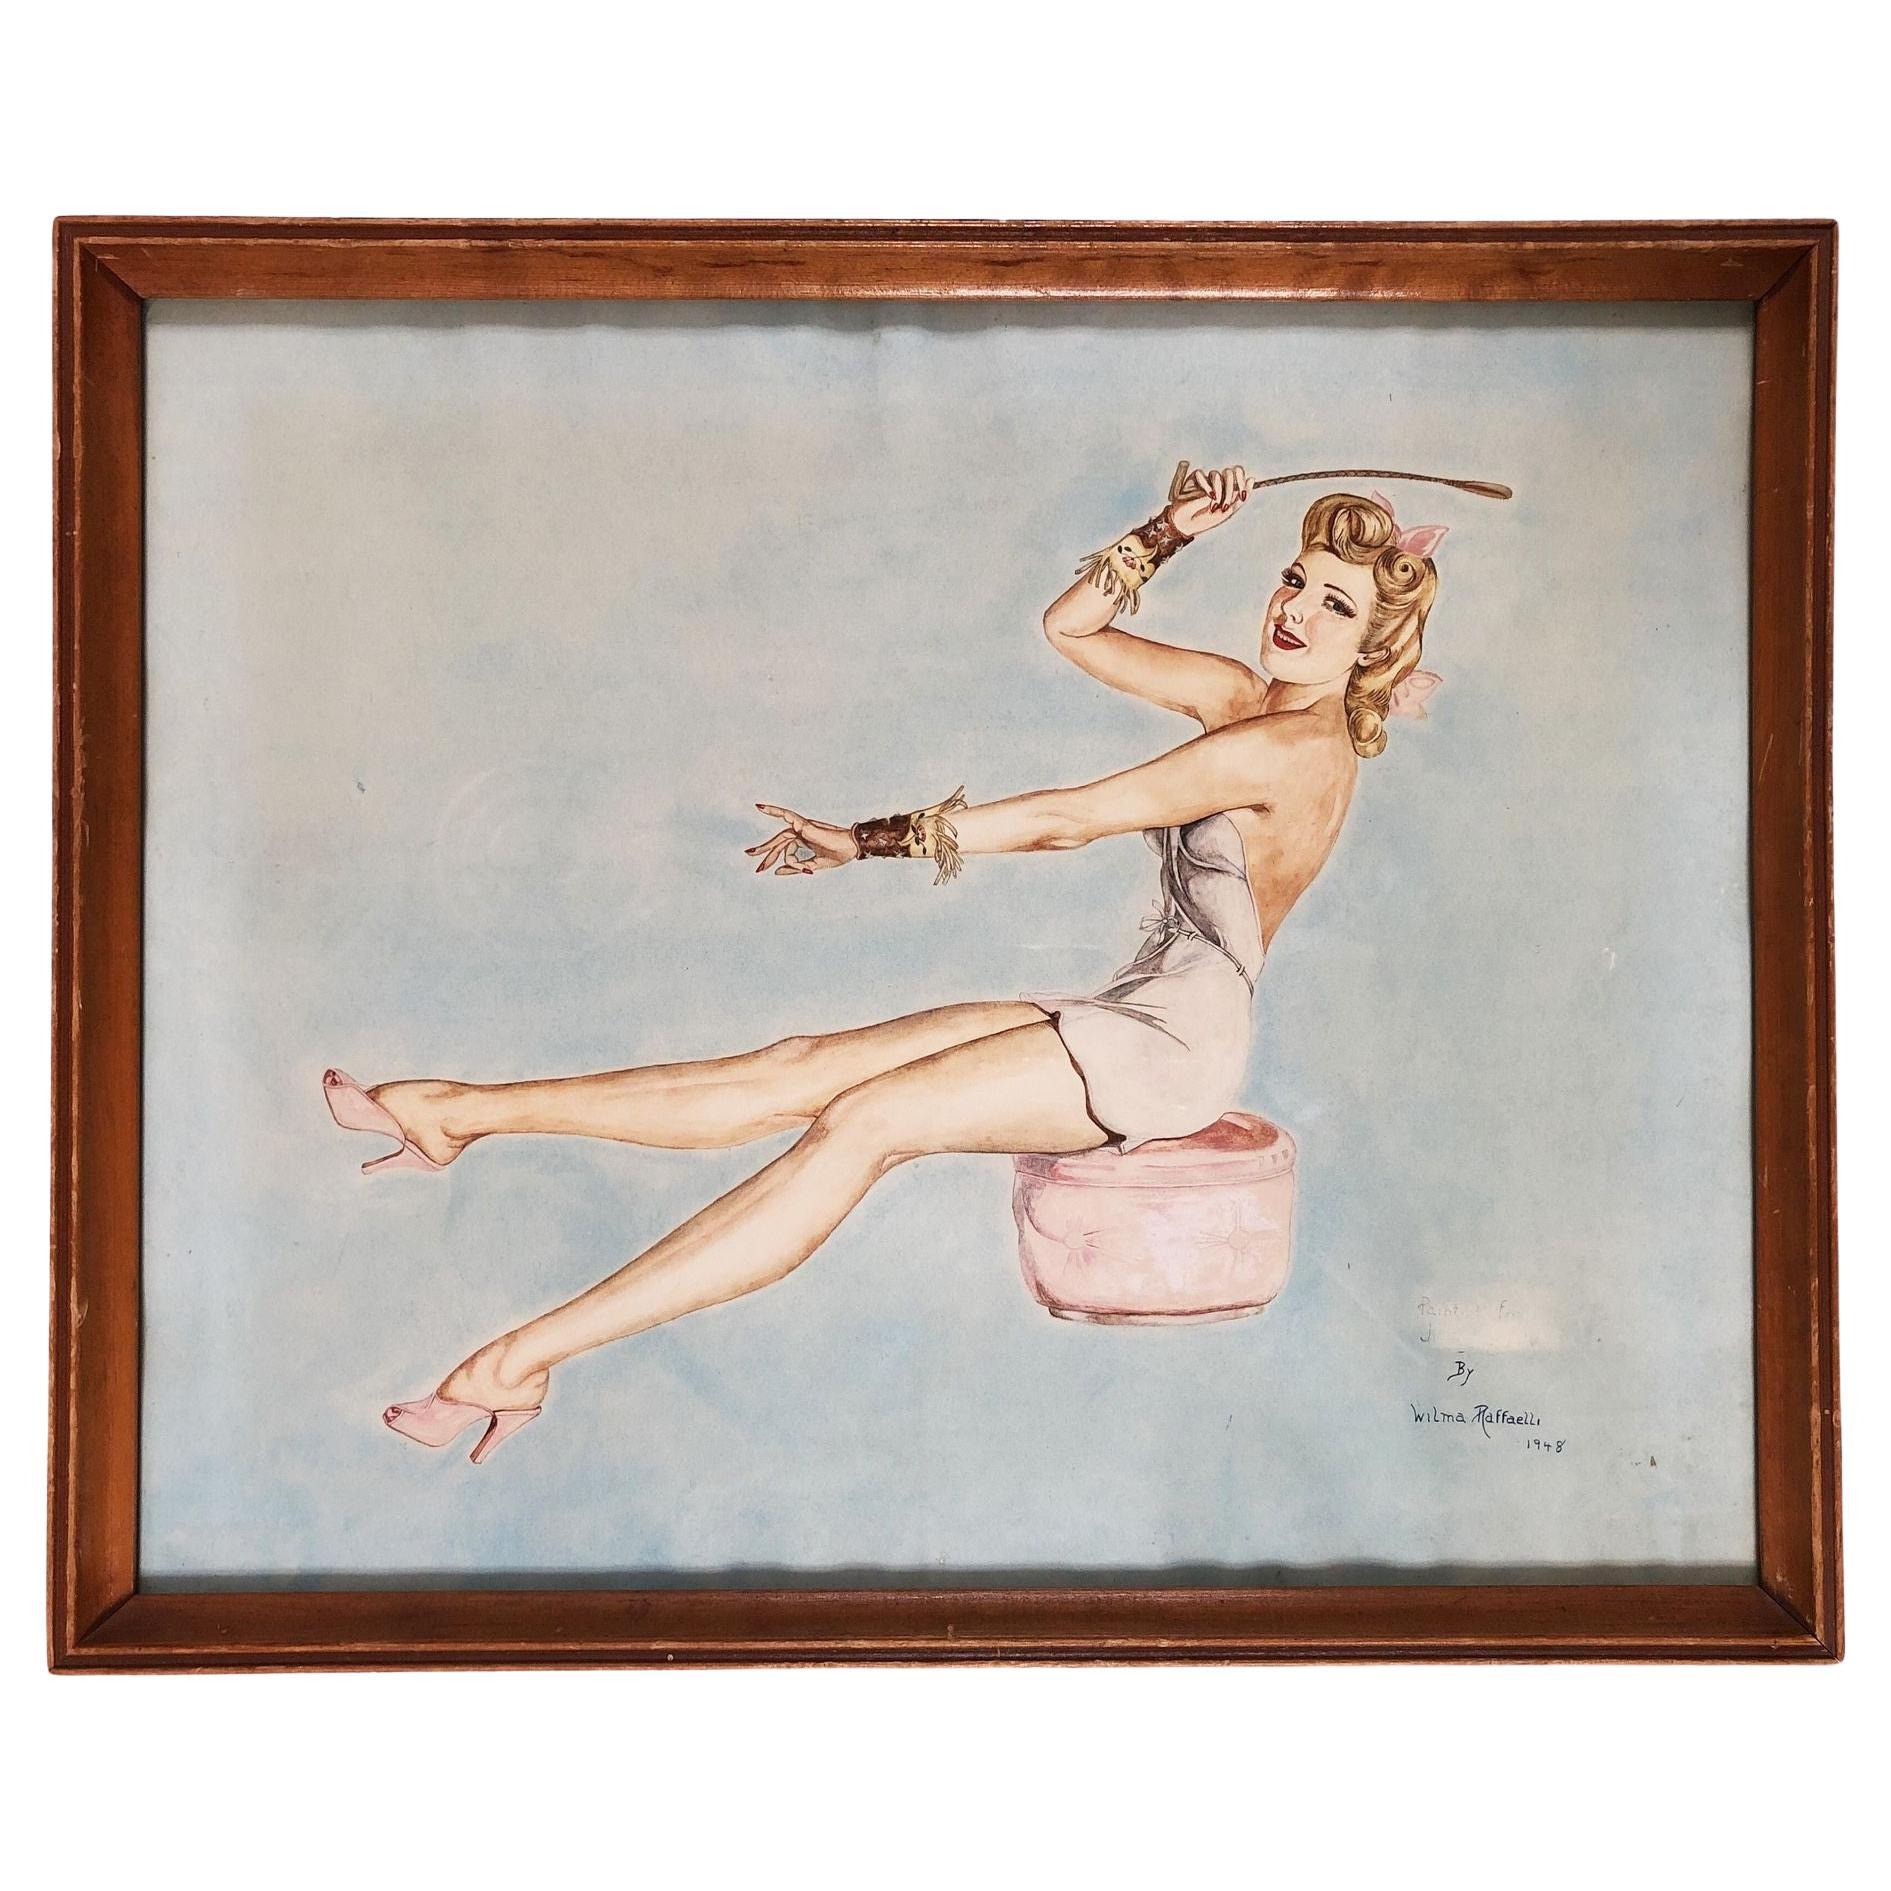 "Lady on Ottoman". Wood Framed Pinup Painting by Wilma Raffaelli, 1948.